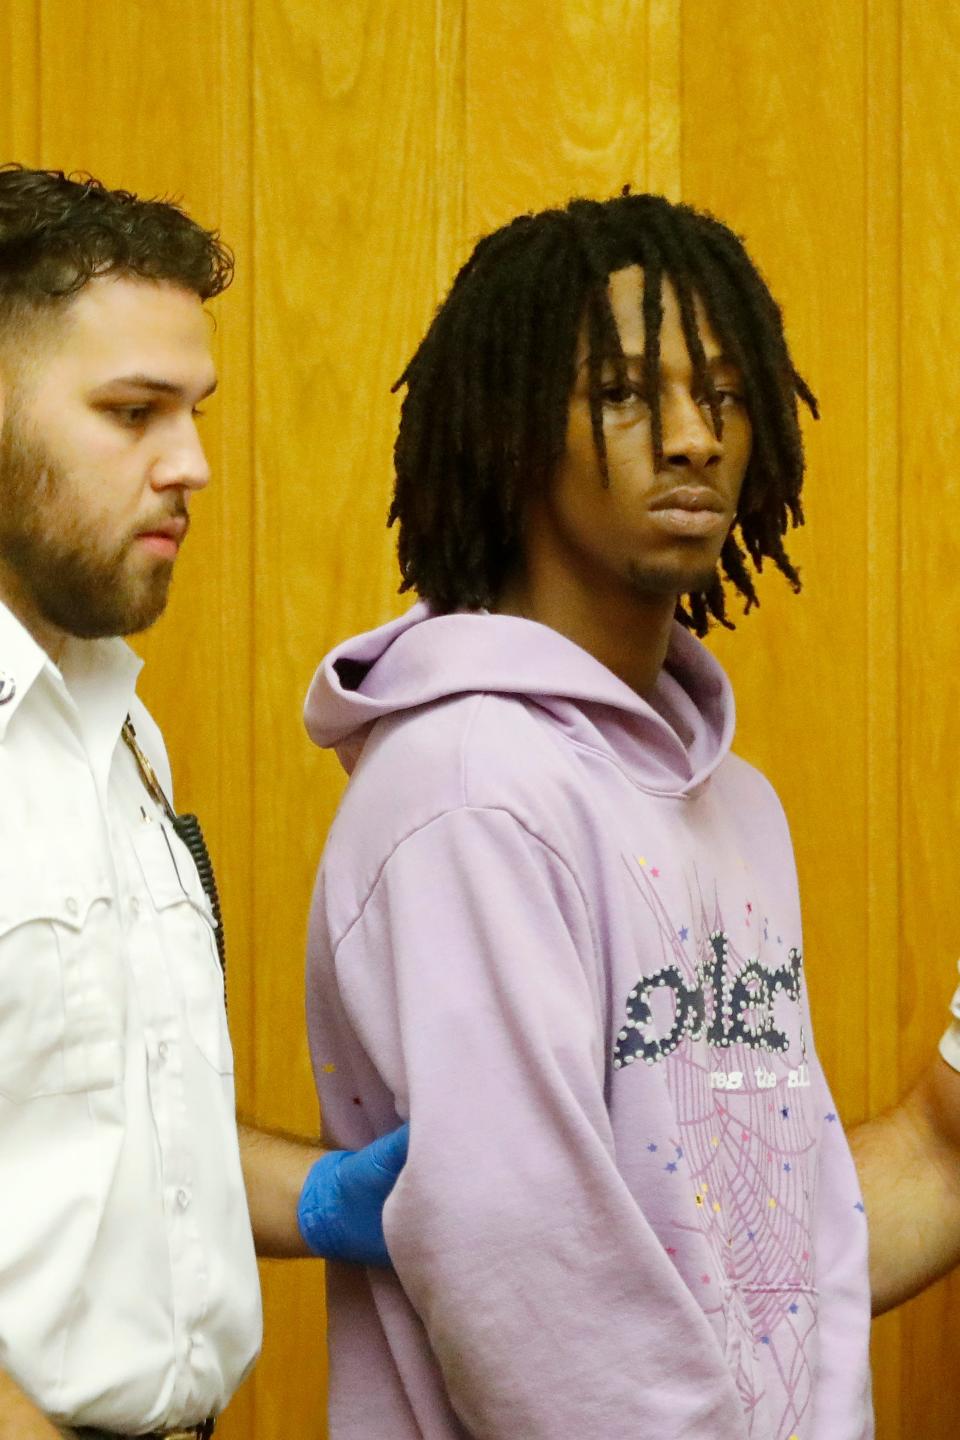 Cheybane Vasconcelos-Furtado, 20, is brought into the New Bedford Third District Court courtroom where he was arraigned for a number of charges including Armed Assault with Intent to Murder in connection with an undercover New Bedford police officer who was shot in the face last week.